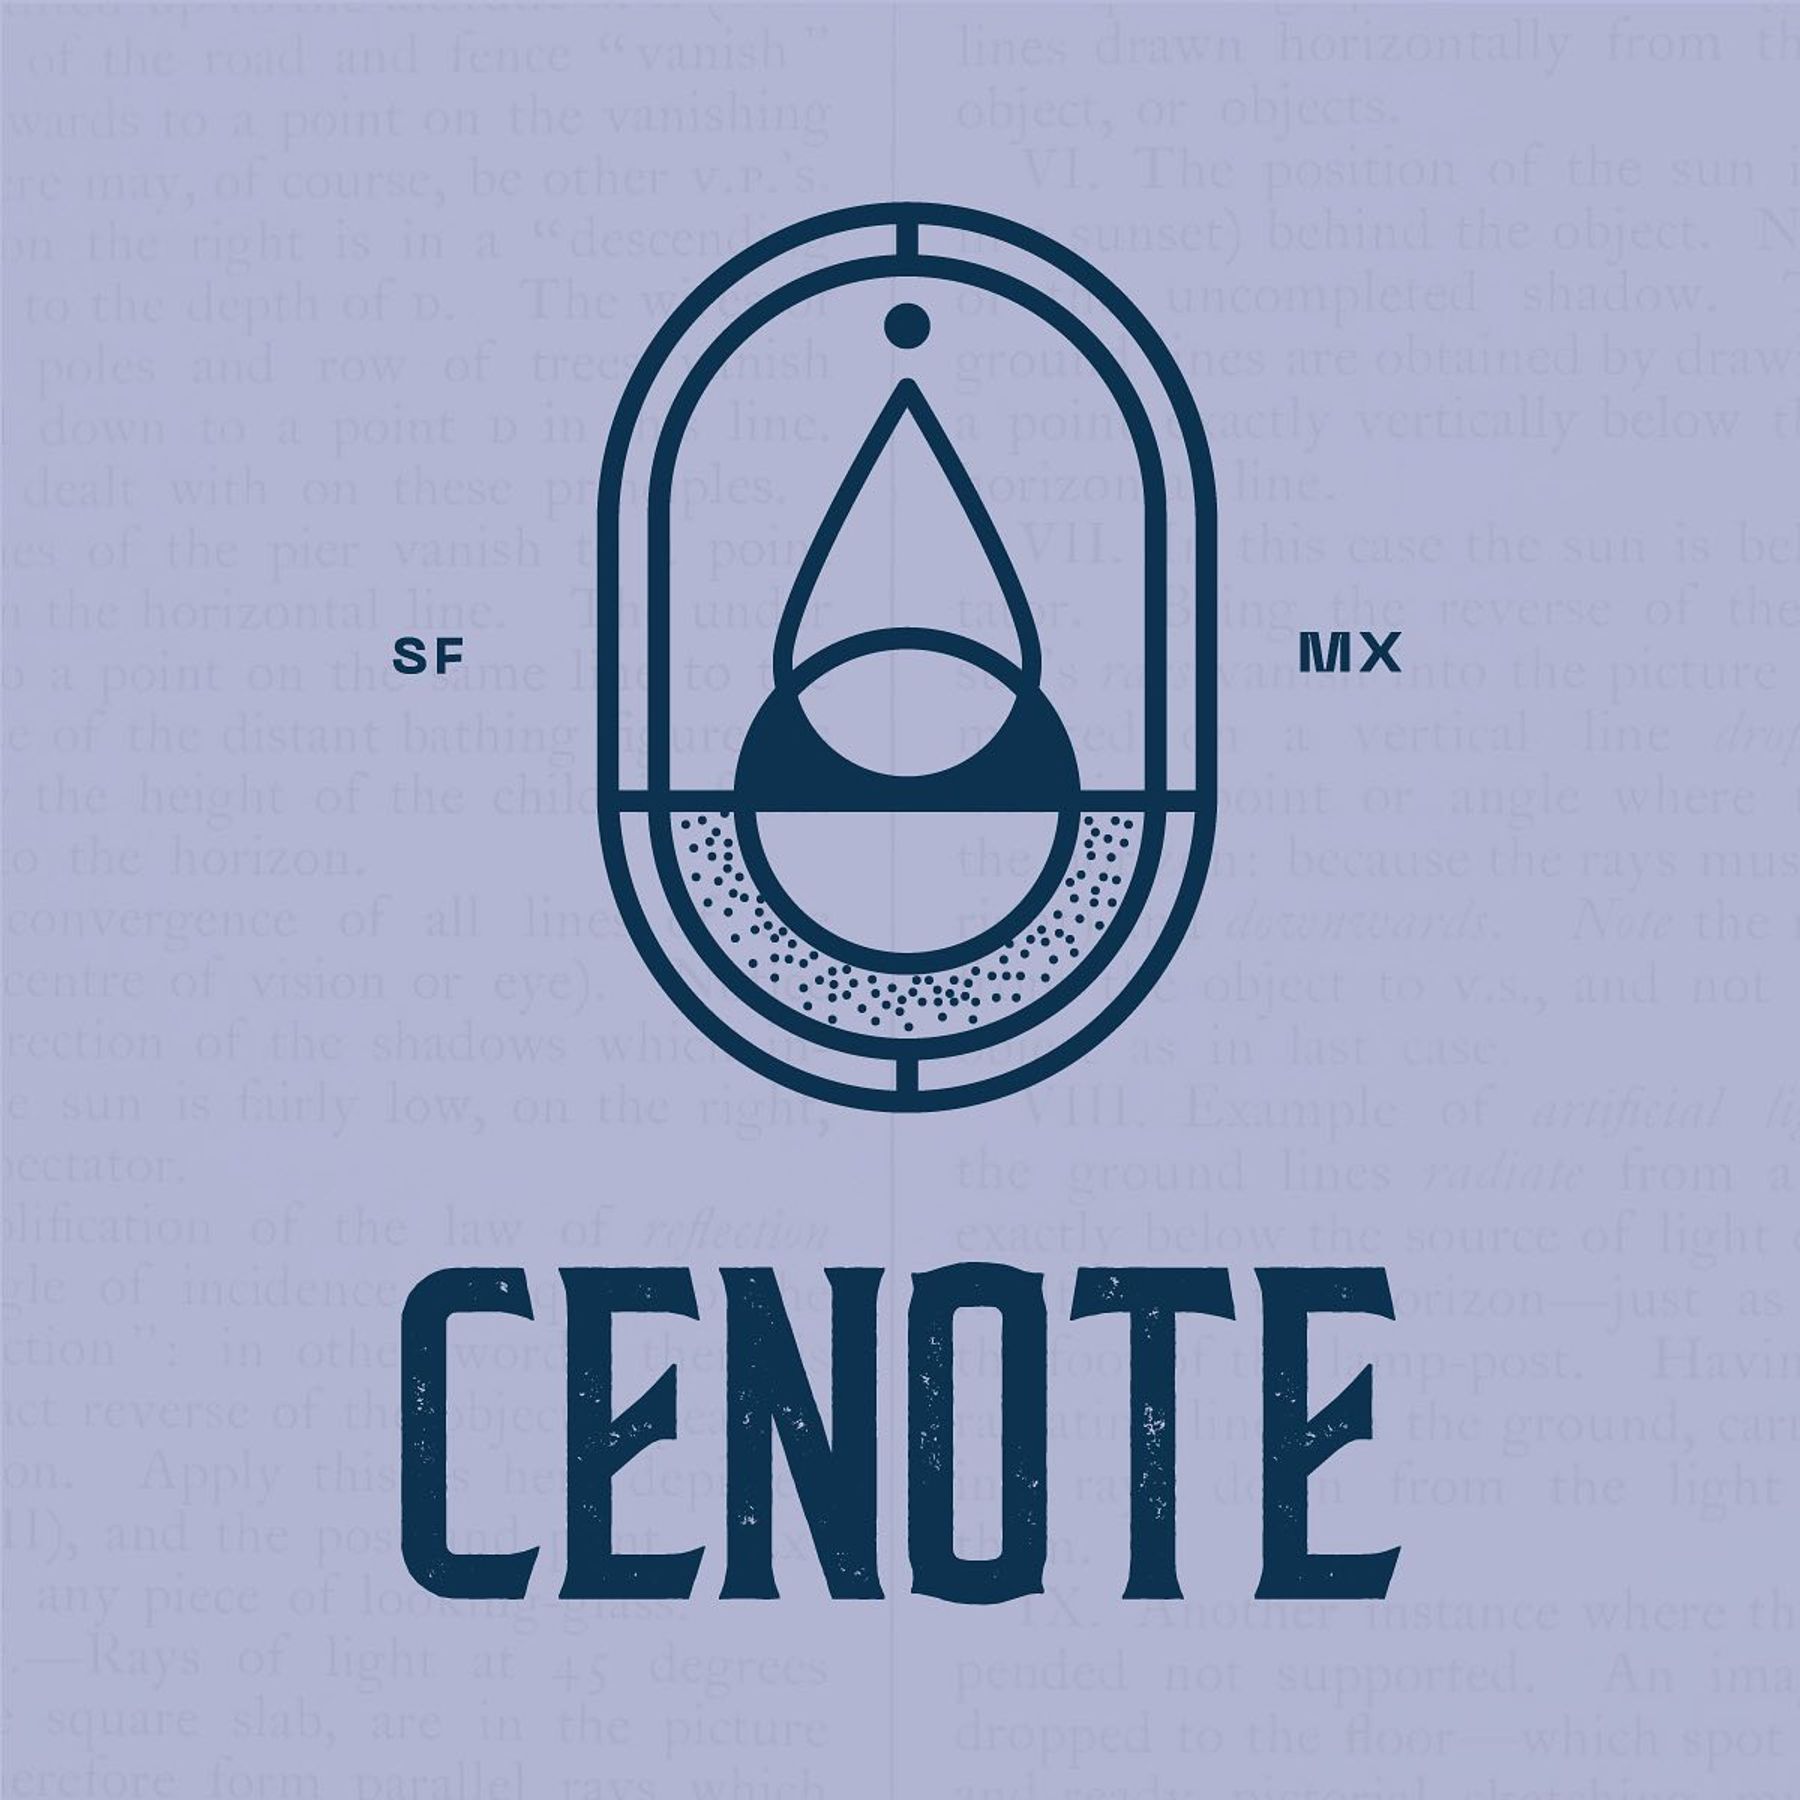 Cenote Mexican Kitchen & Watering Hole | Downtown San Francisco